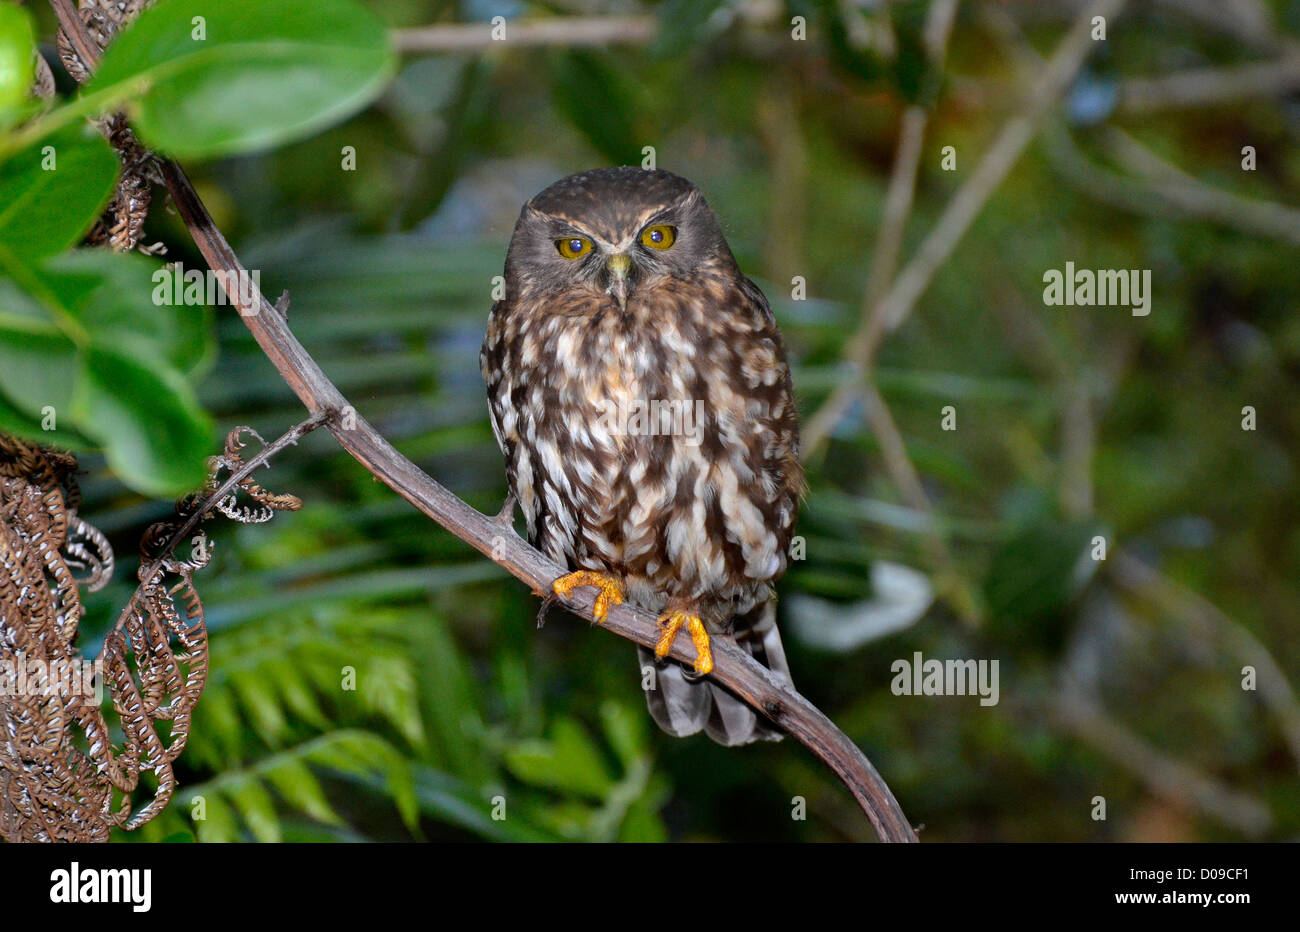 The Morepork - Tasmanian Spotted Owl or Southern Boobook, a small brown owl found across New Zealand and Australia Stock Photo